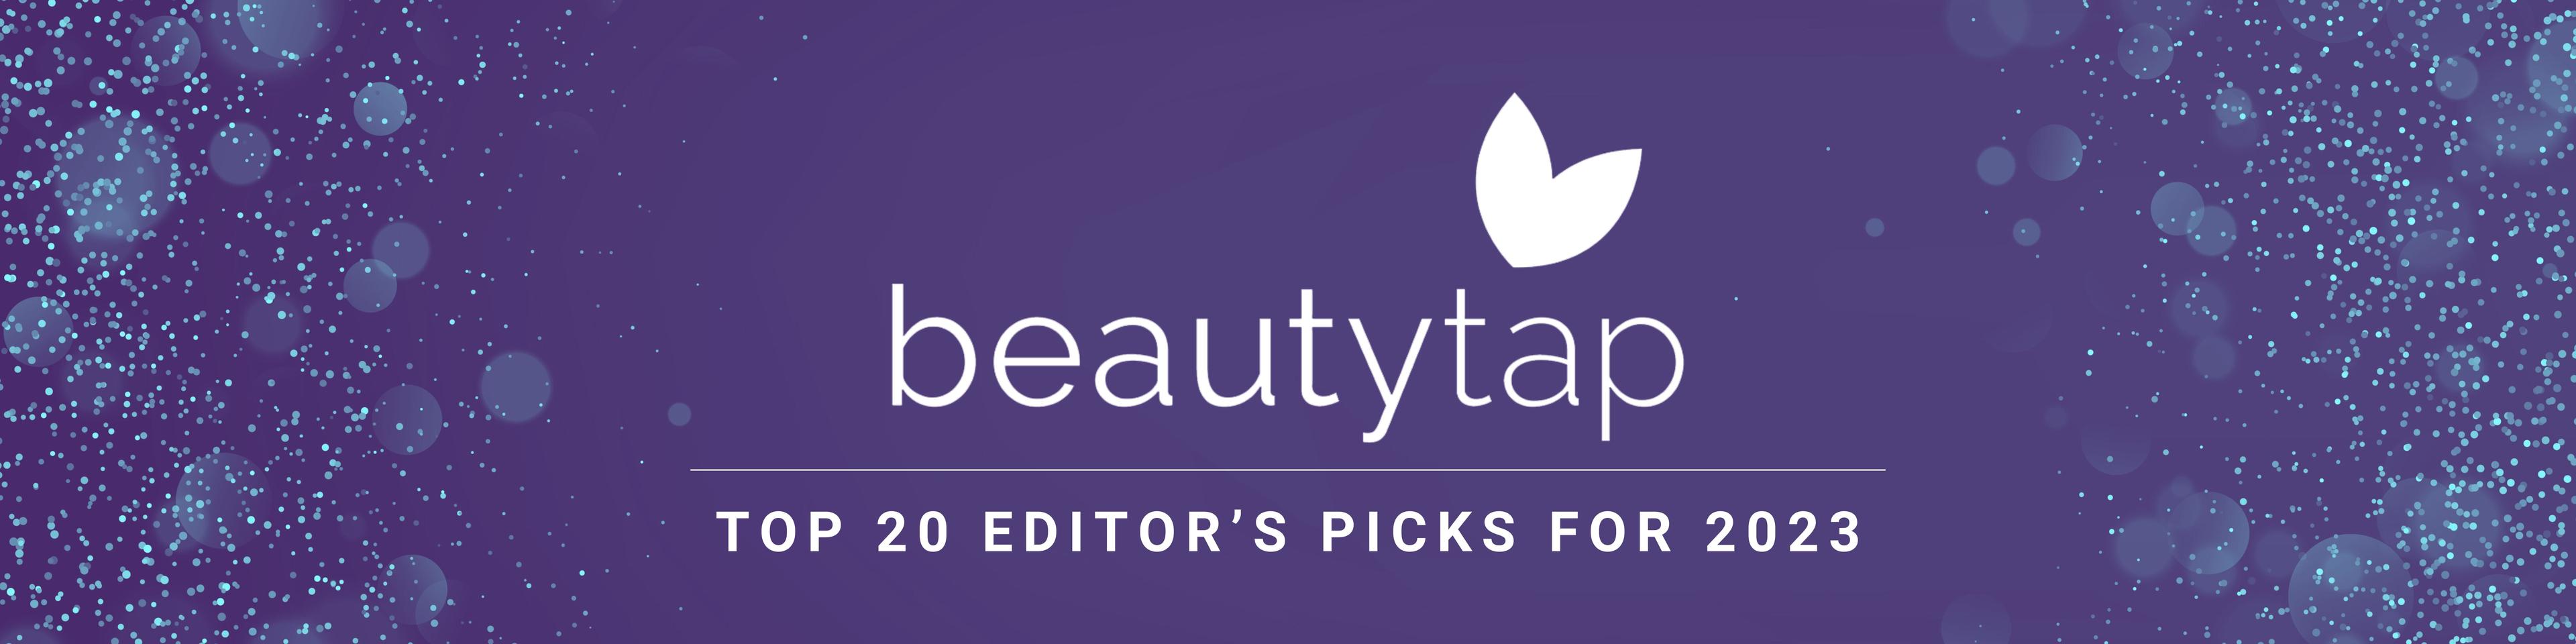 Beautytap Awards: Top 20 Editor’s Picks for 2023